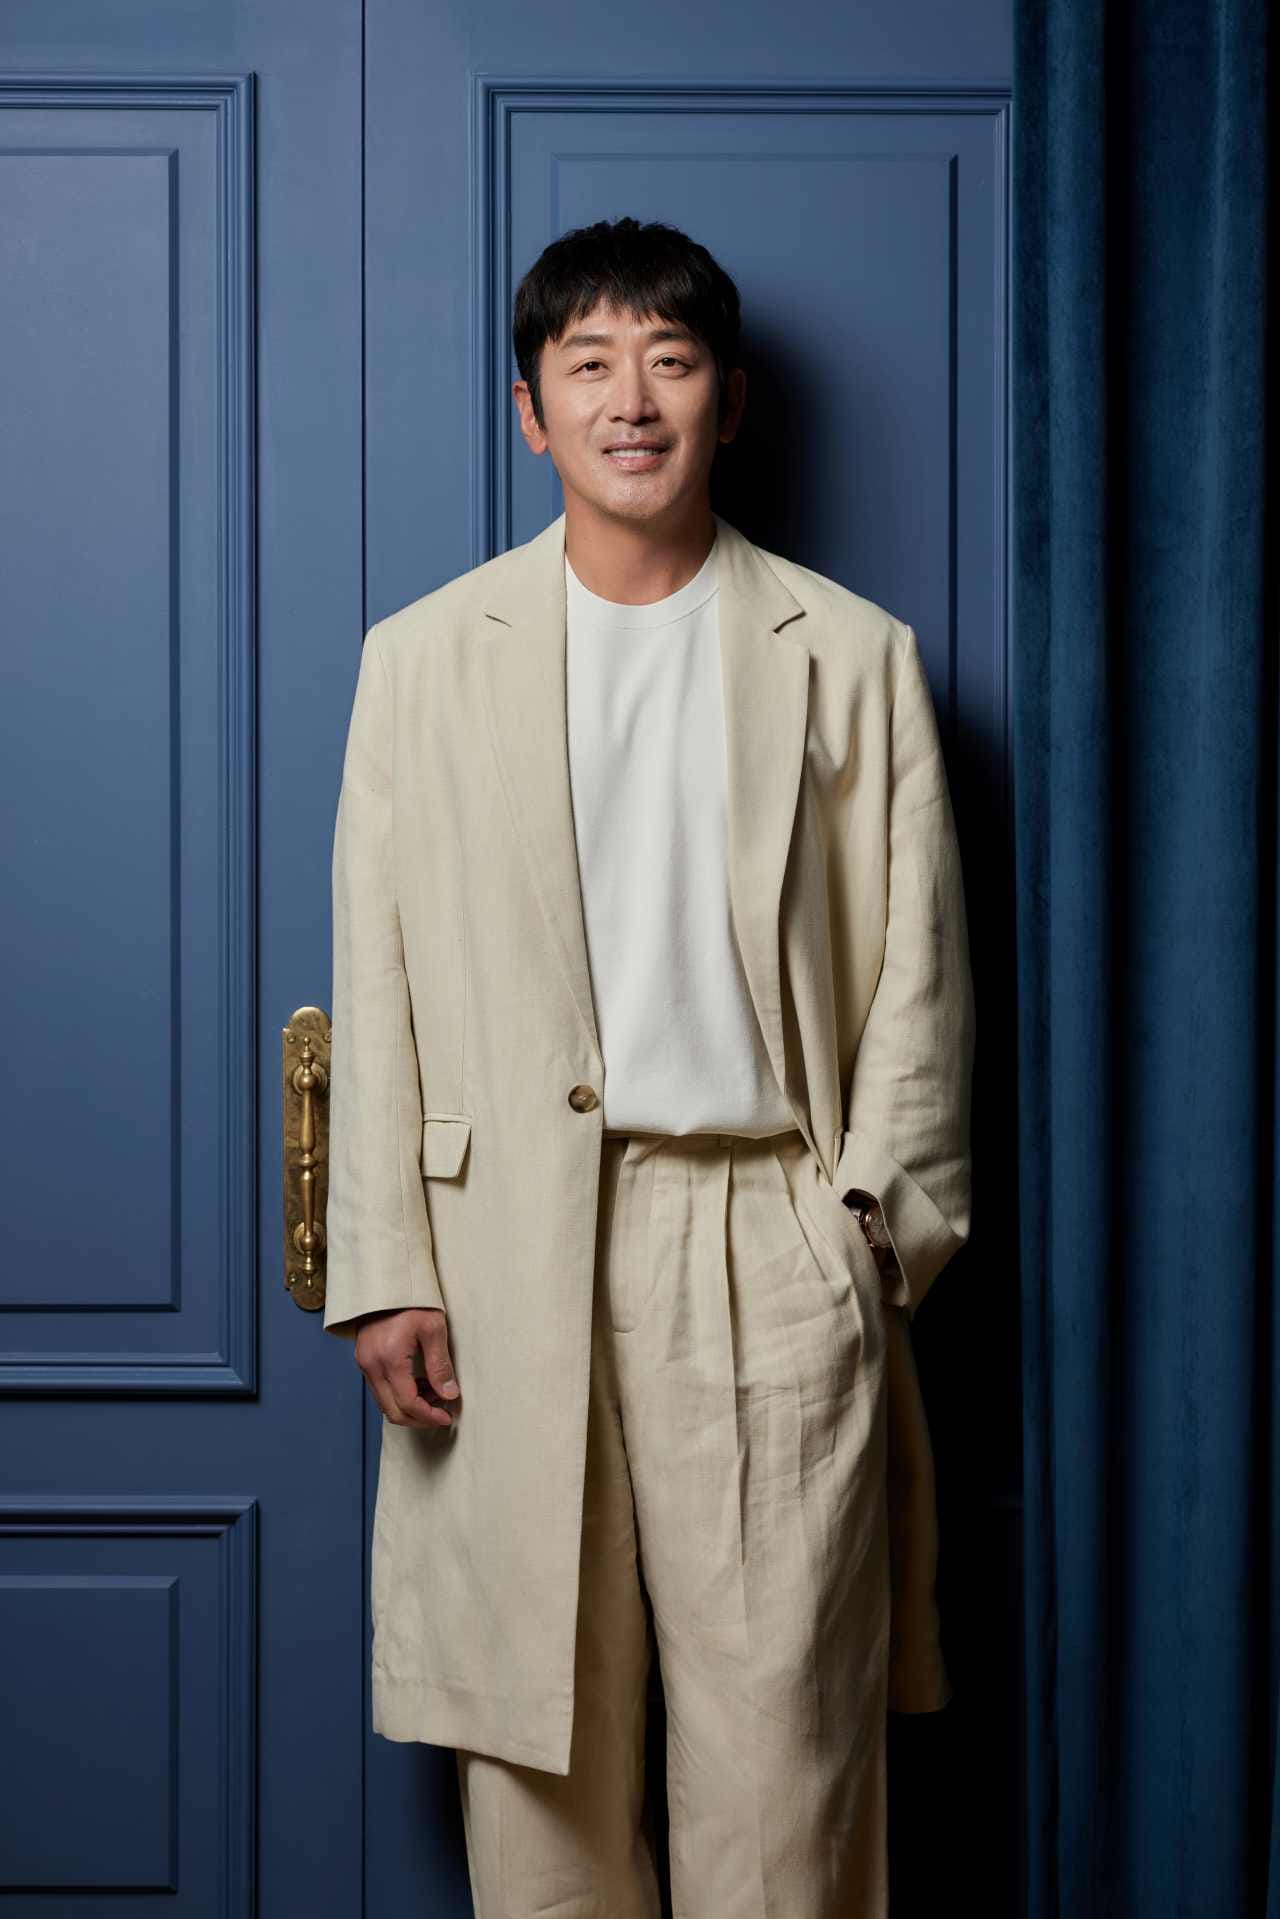 Image : Main Actor Ha Jung-woo in the Movie 